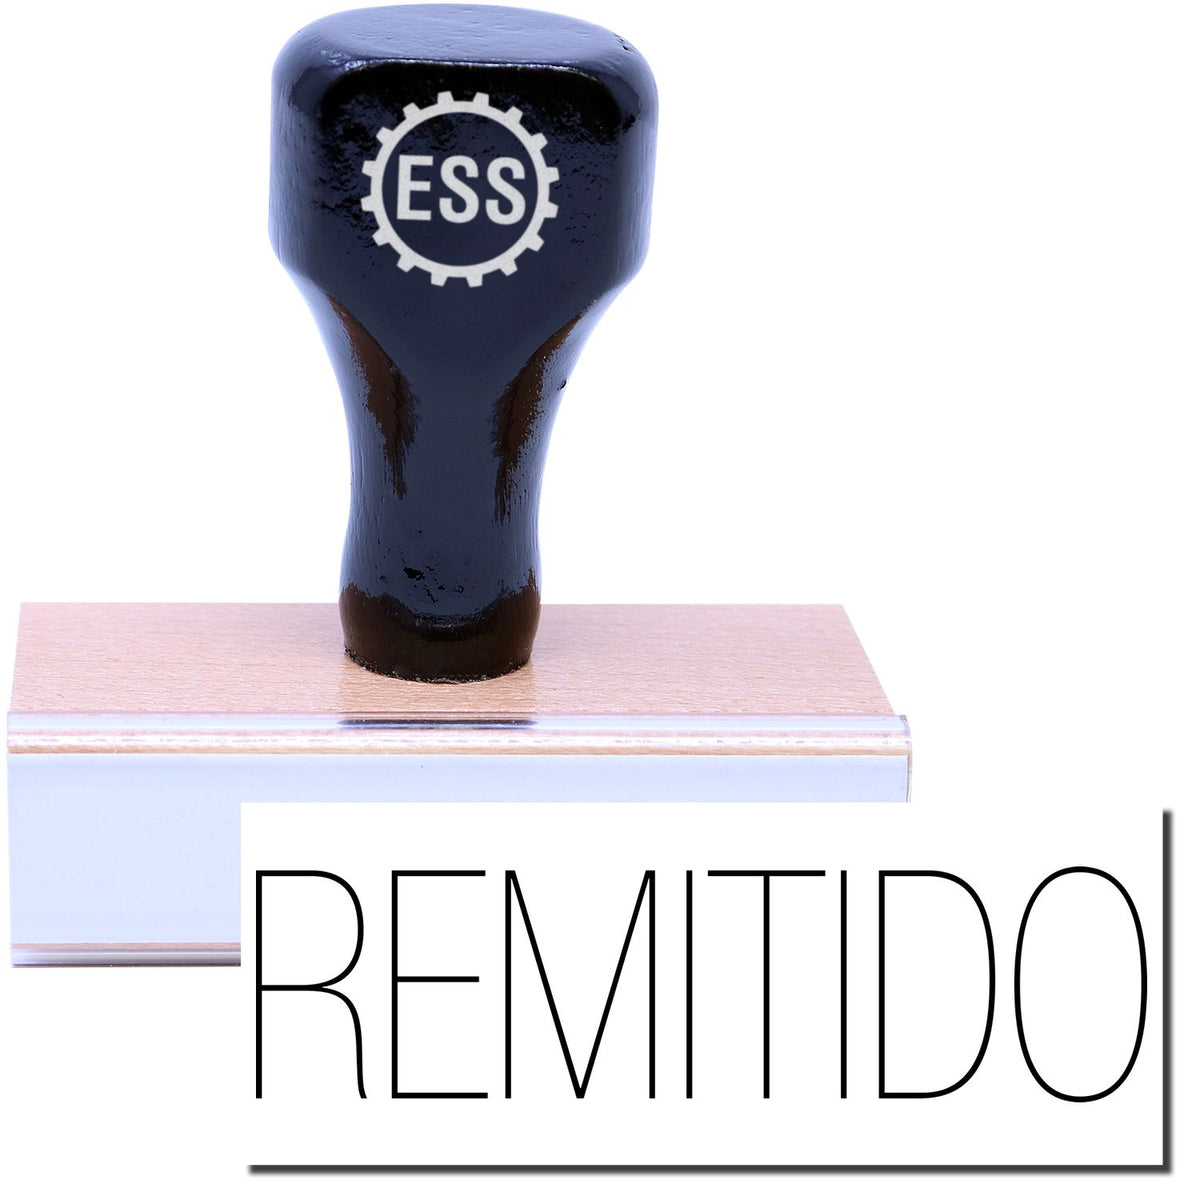 A stock office rubber stamp with a stamped image showing how the text &quot;REMITIDO&quot; in a large font is displayed after stamping.